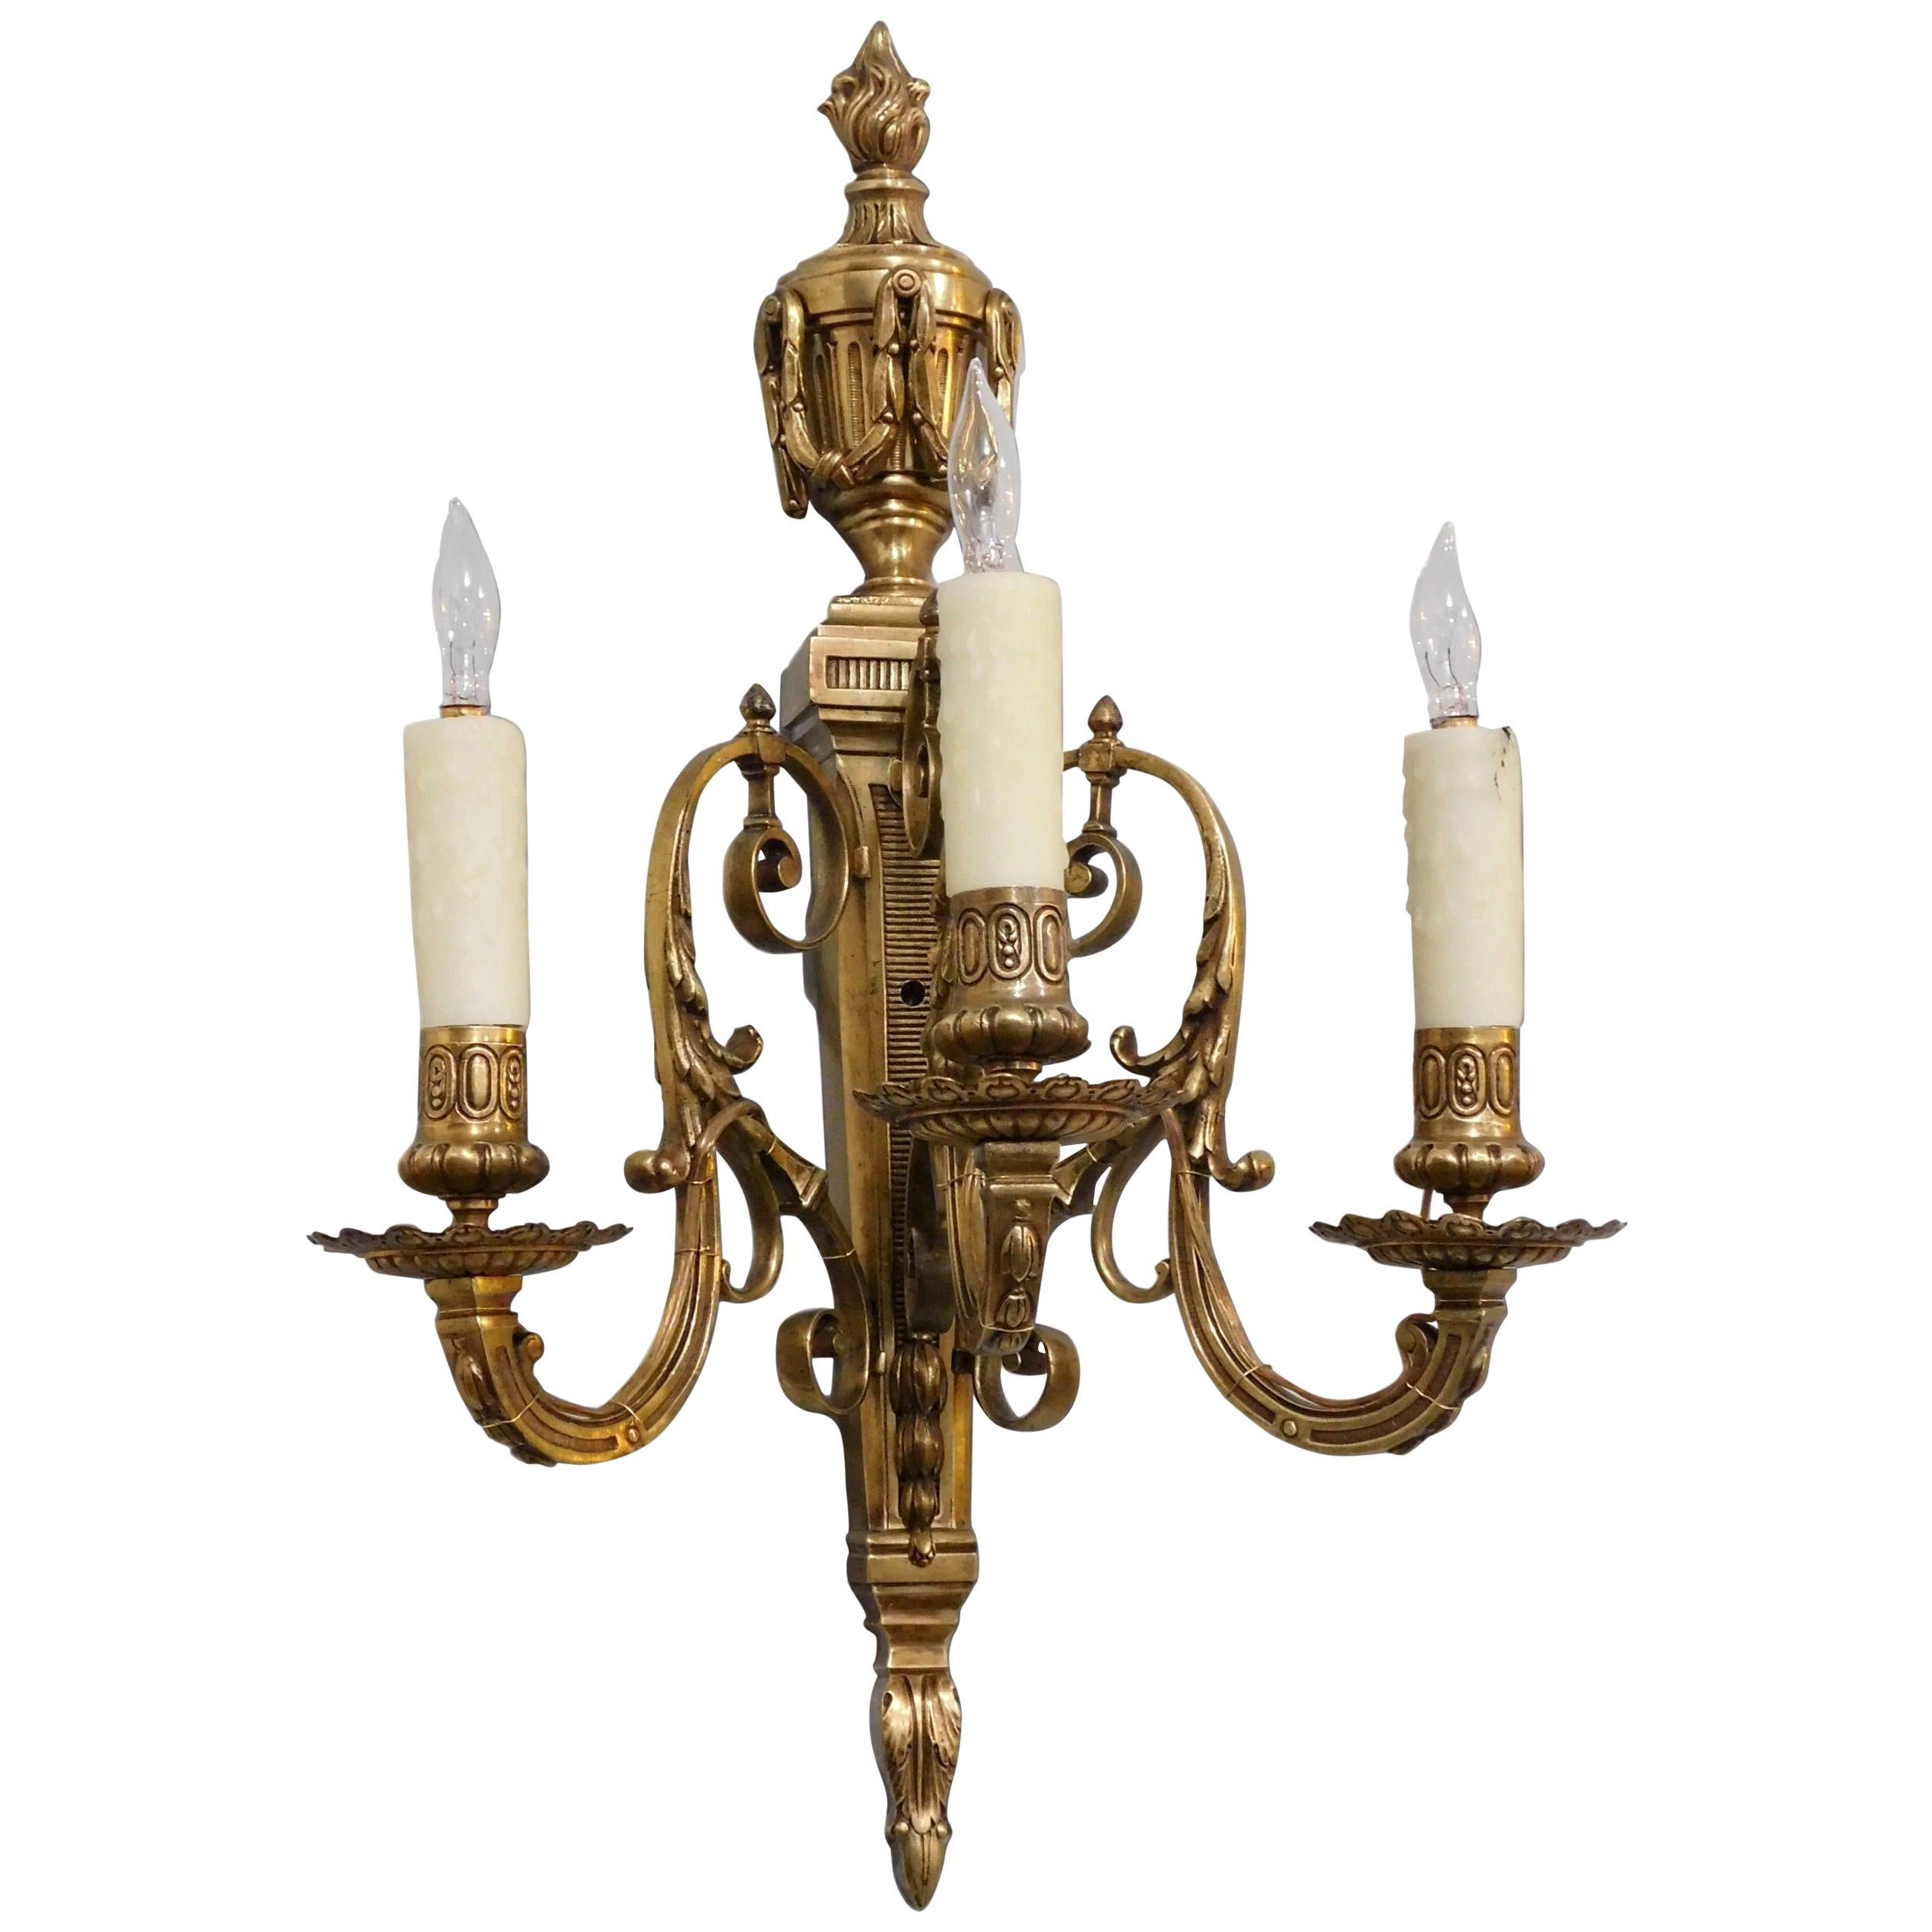 Pair of Neoclassical Style Brass Candelabra Wall Lamp Sconces, France, 1880 For Sale